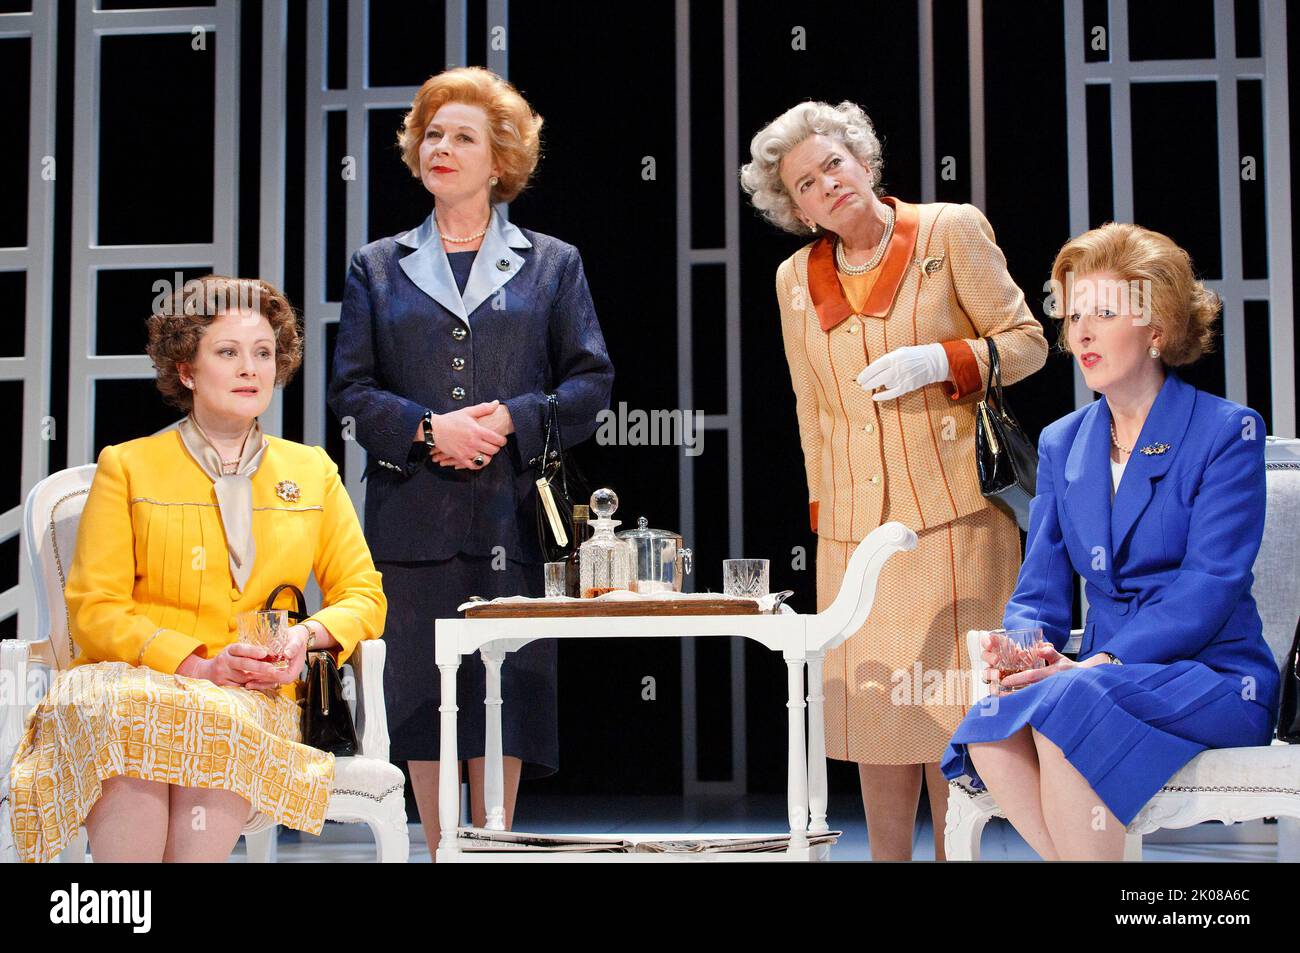 l-r: Lucy Robinson (Liz - Younger Queen), Stella Gonet (T - Older Thatcher), Marion Bailey (Q - Older Queen), Fenella Woolgar (Mags - Younger Thatcher) in HANDBAGGED by Moira Buffini at the Vaudeville Theatre, London WC2   10/04/2014   a Tricycle Theatre, London NW6 2013 production  design: Richard Kent  lighting: Oliver Fenwick  director: Indhu Rubasingham Stock Photo